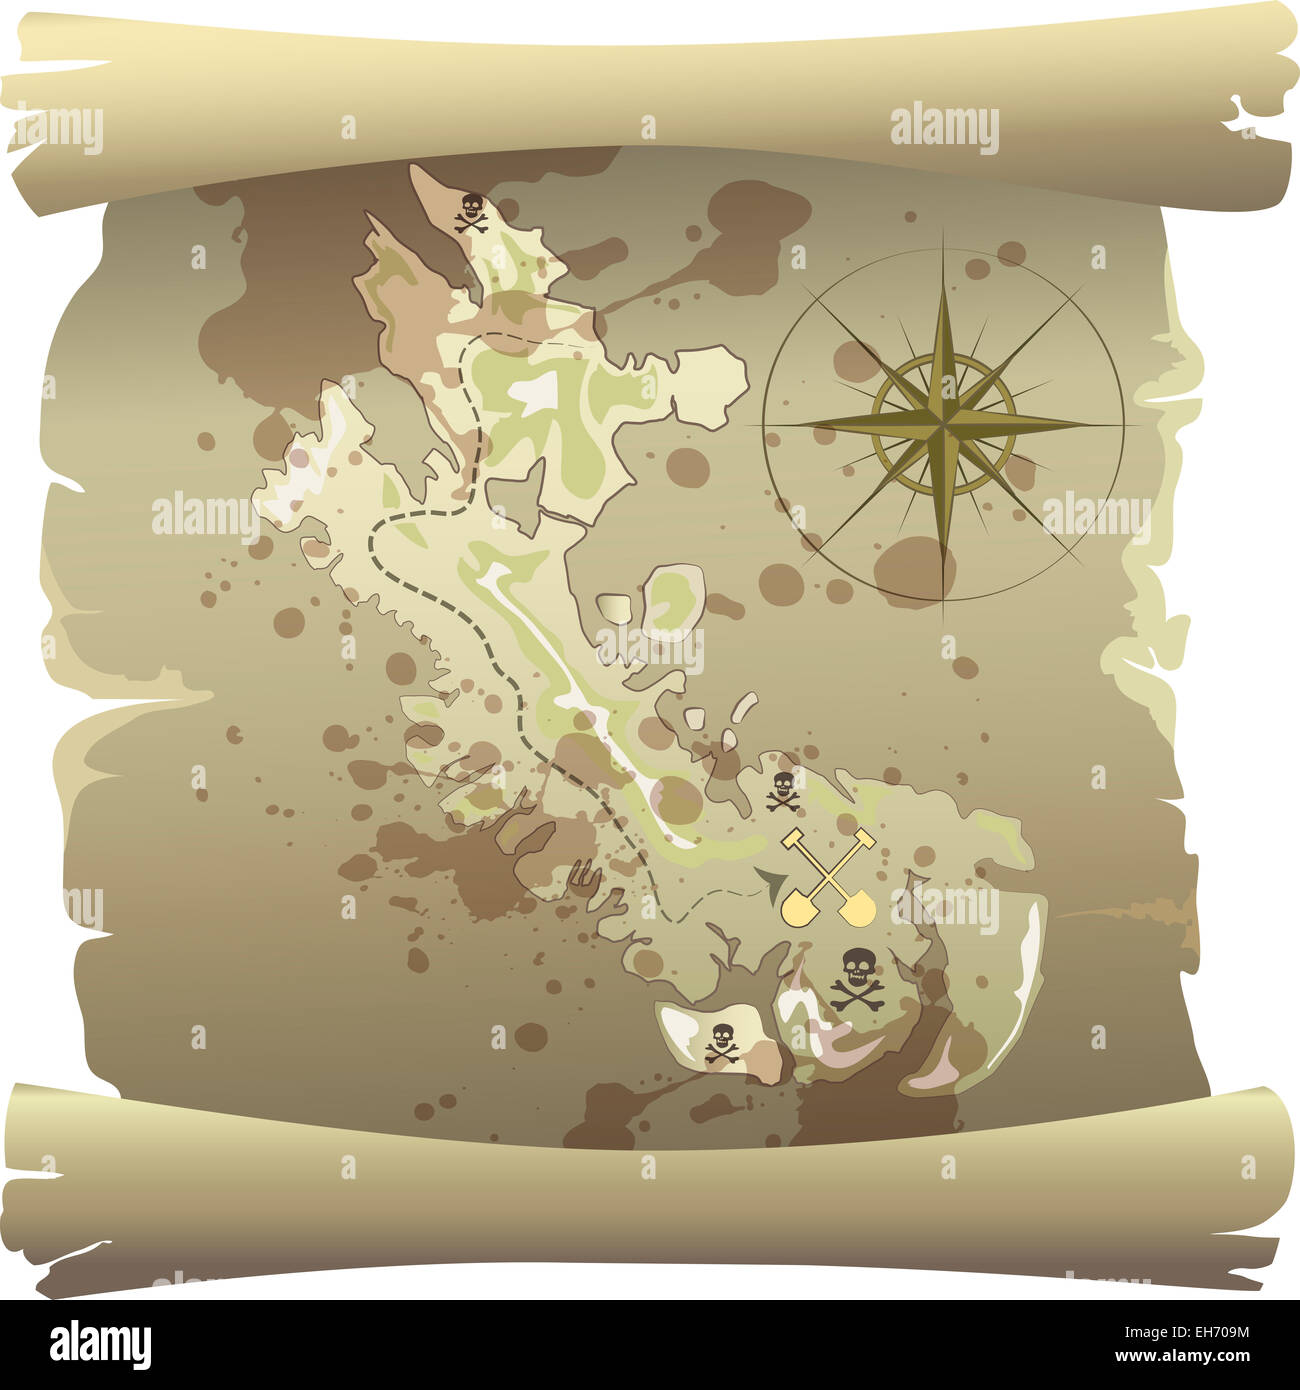 illustration with old pirate map of treasure island drawn in vintage cartoon style Stock Photo